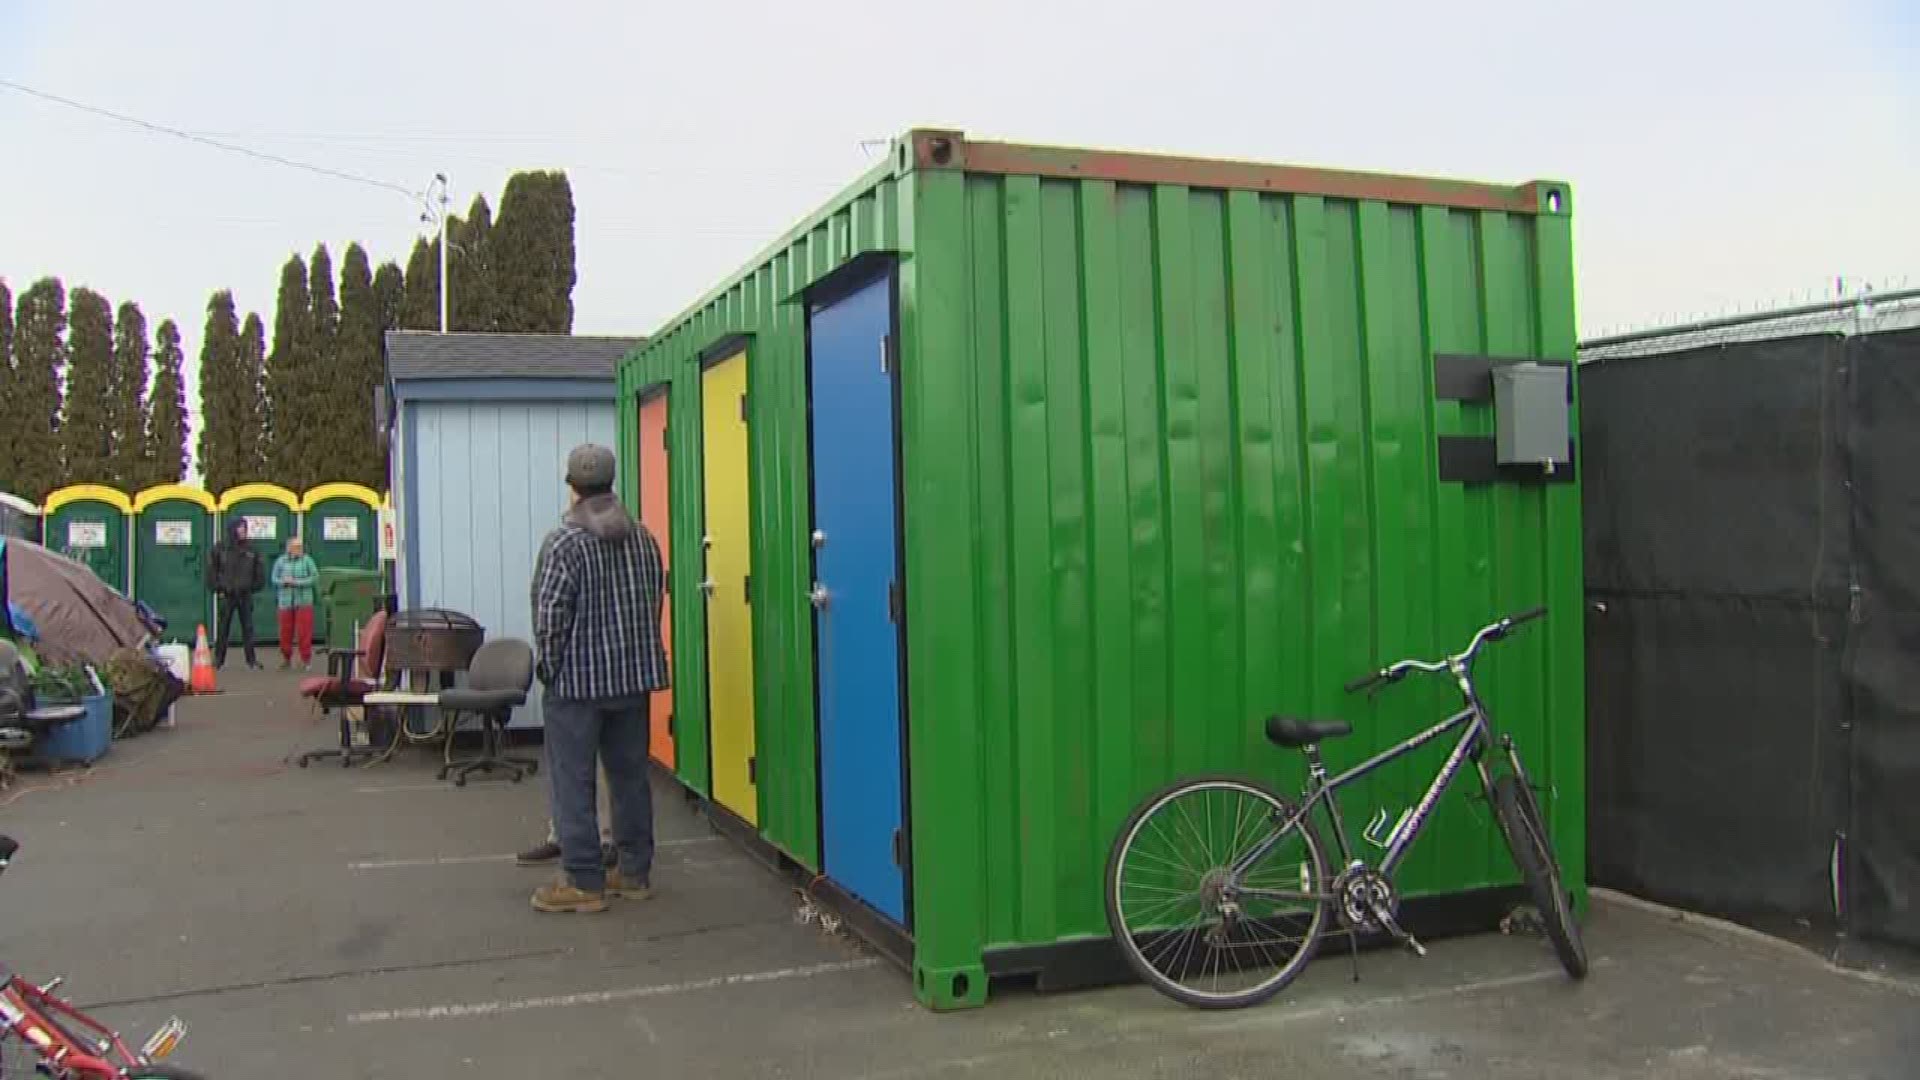 Olympia mayor wants to buy more storage units to be converted into homeless units, but she doesn't have the funds.